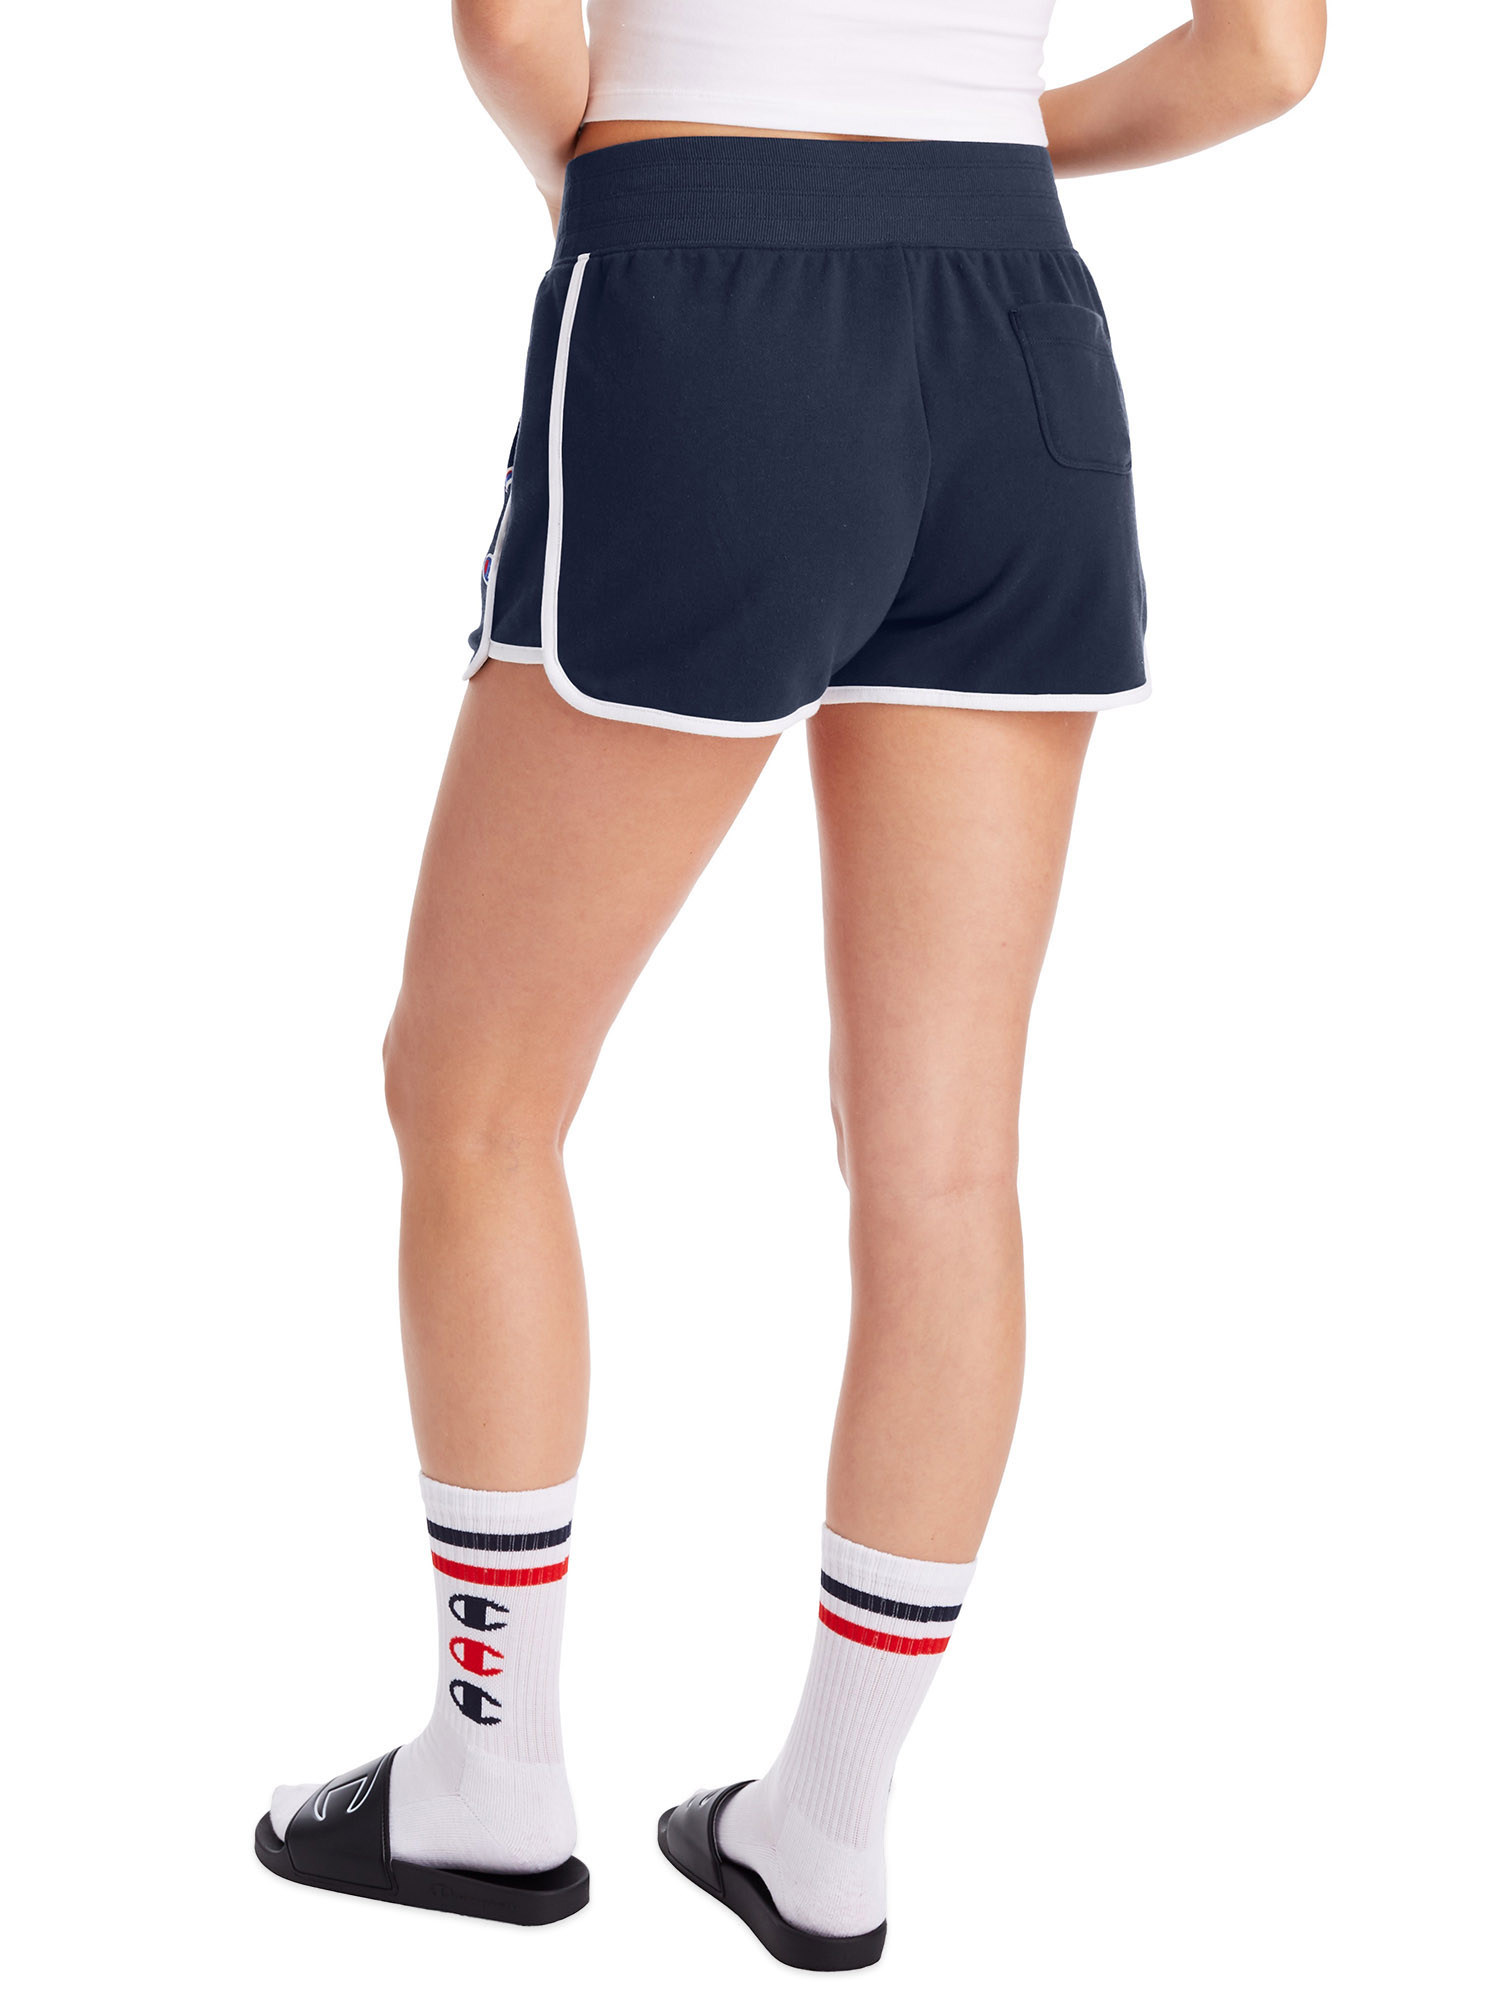 Champion Women's Campus French Terry Short - image 2 of 5